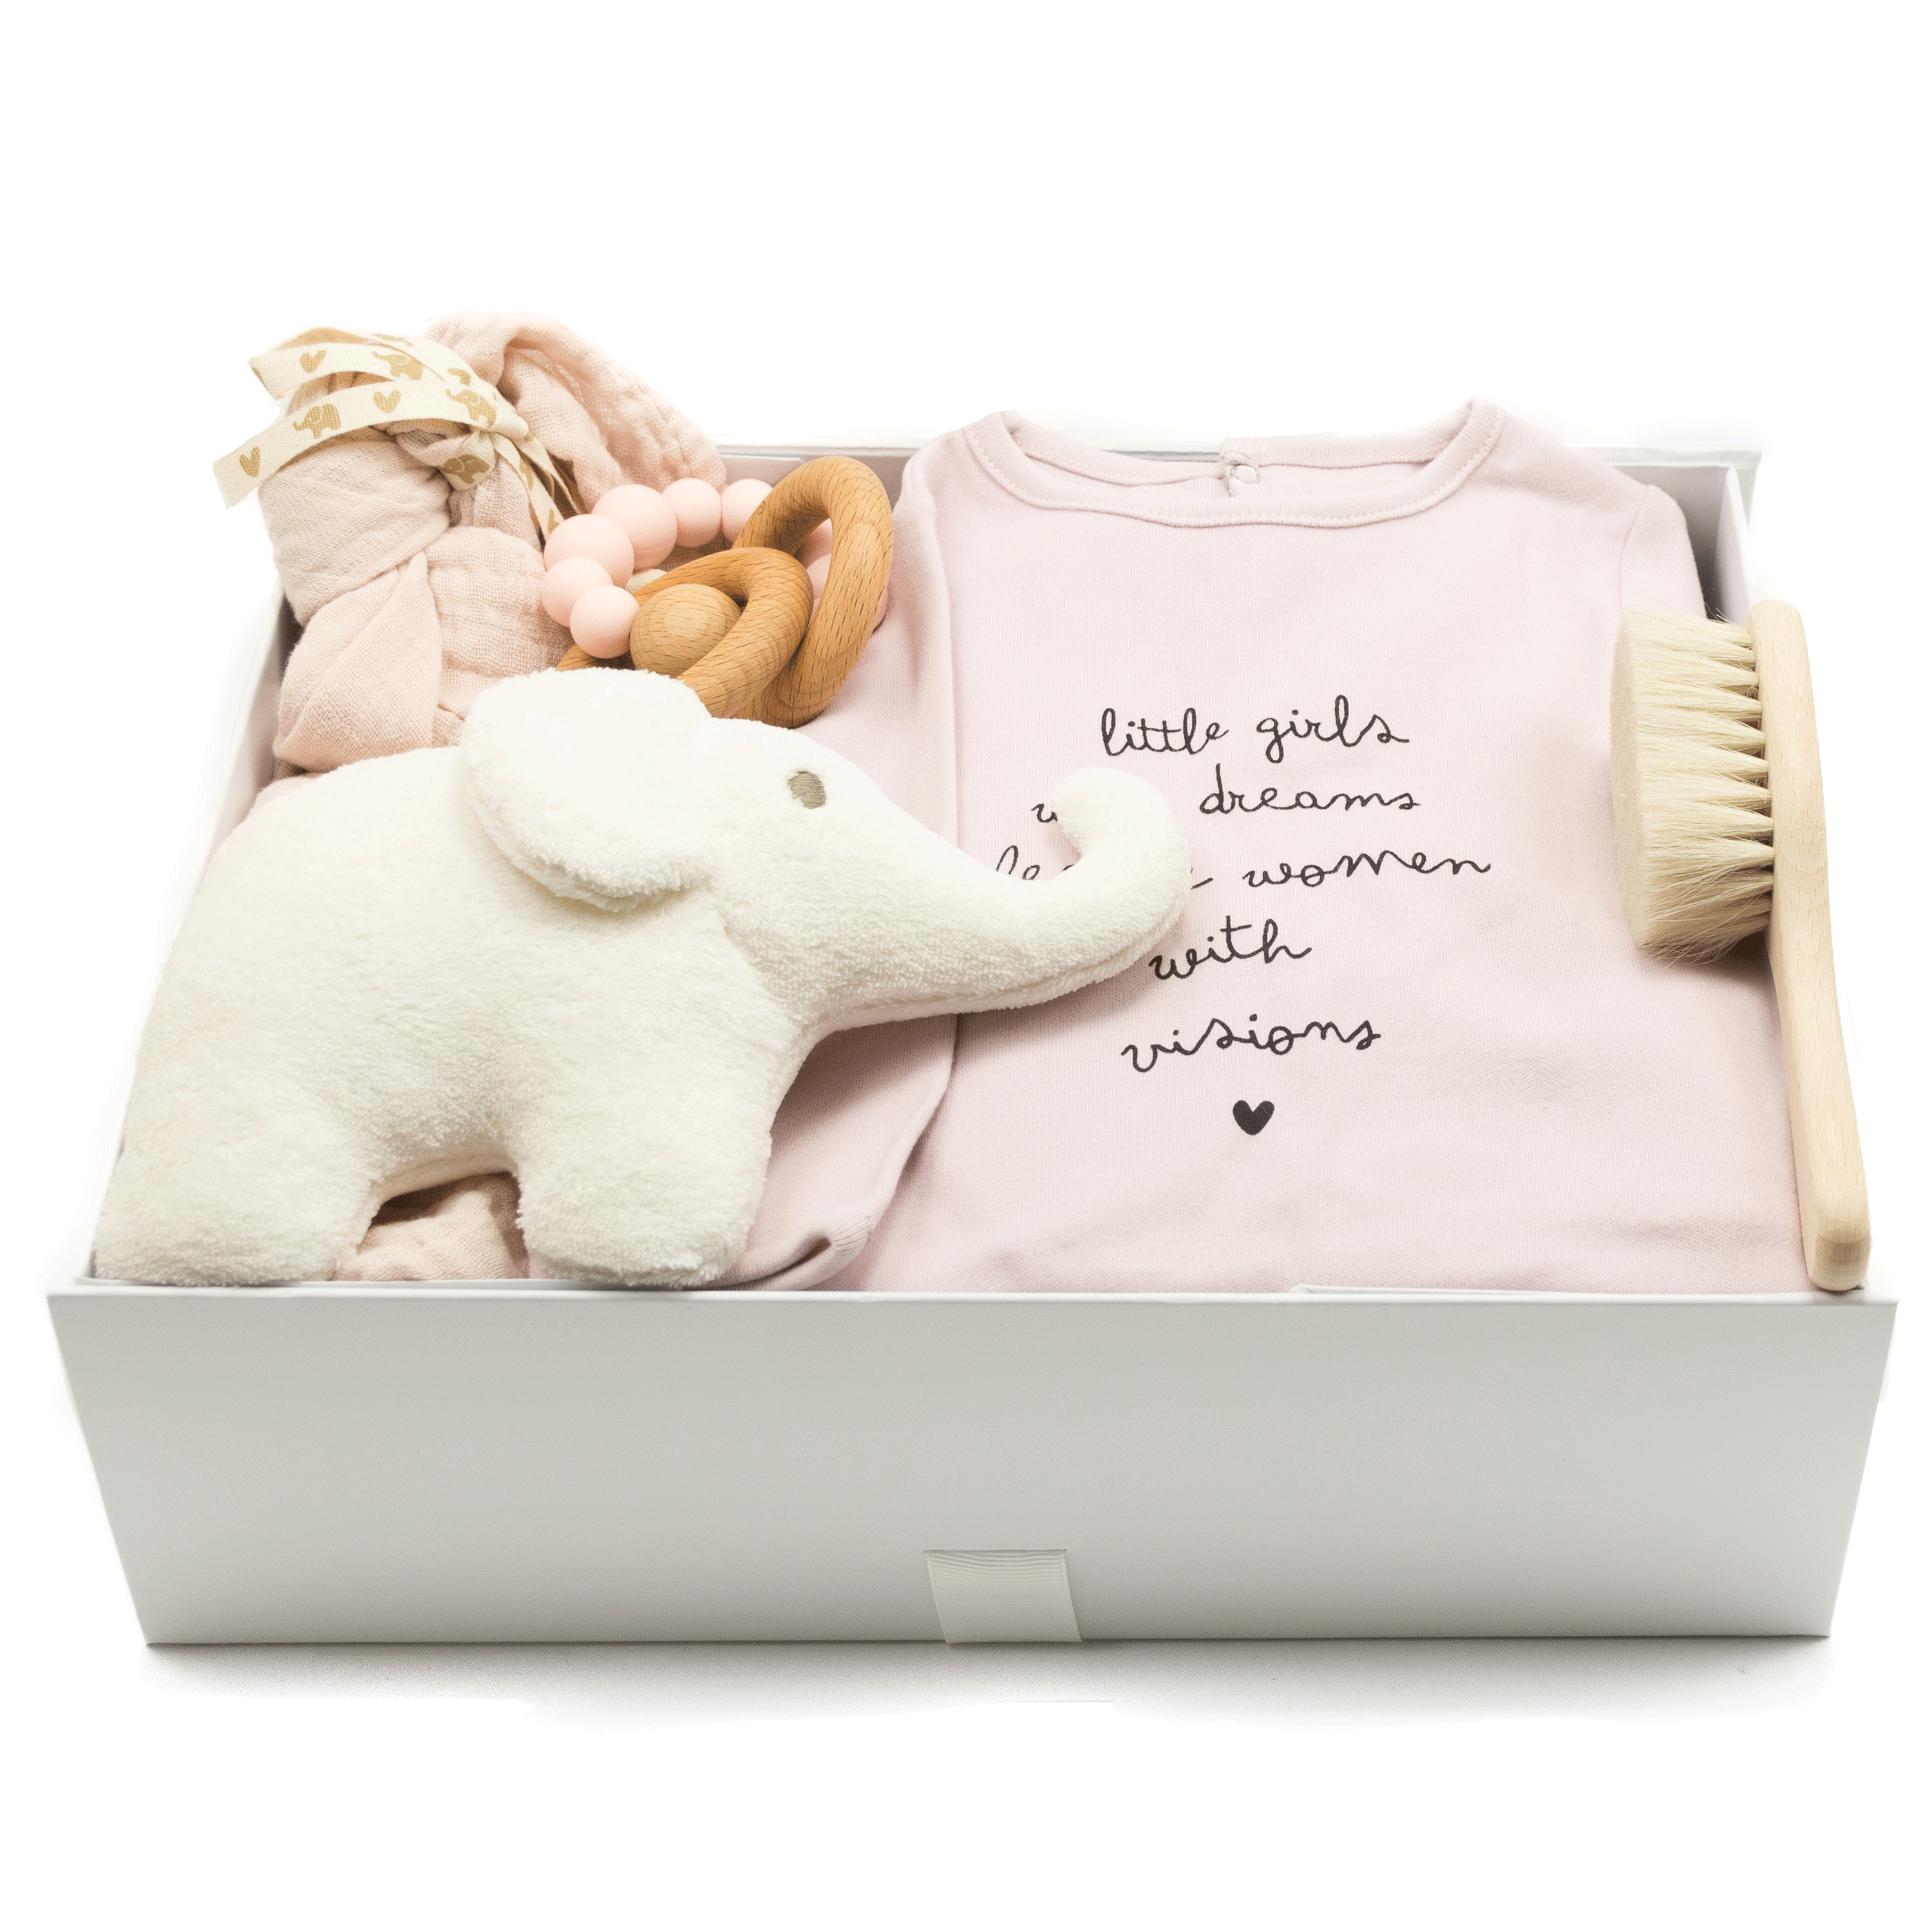 Baby Girl Gift Box featuring organic products, perfect for your Corporate Baby Gifts 